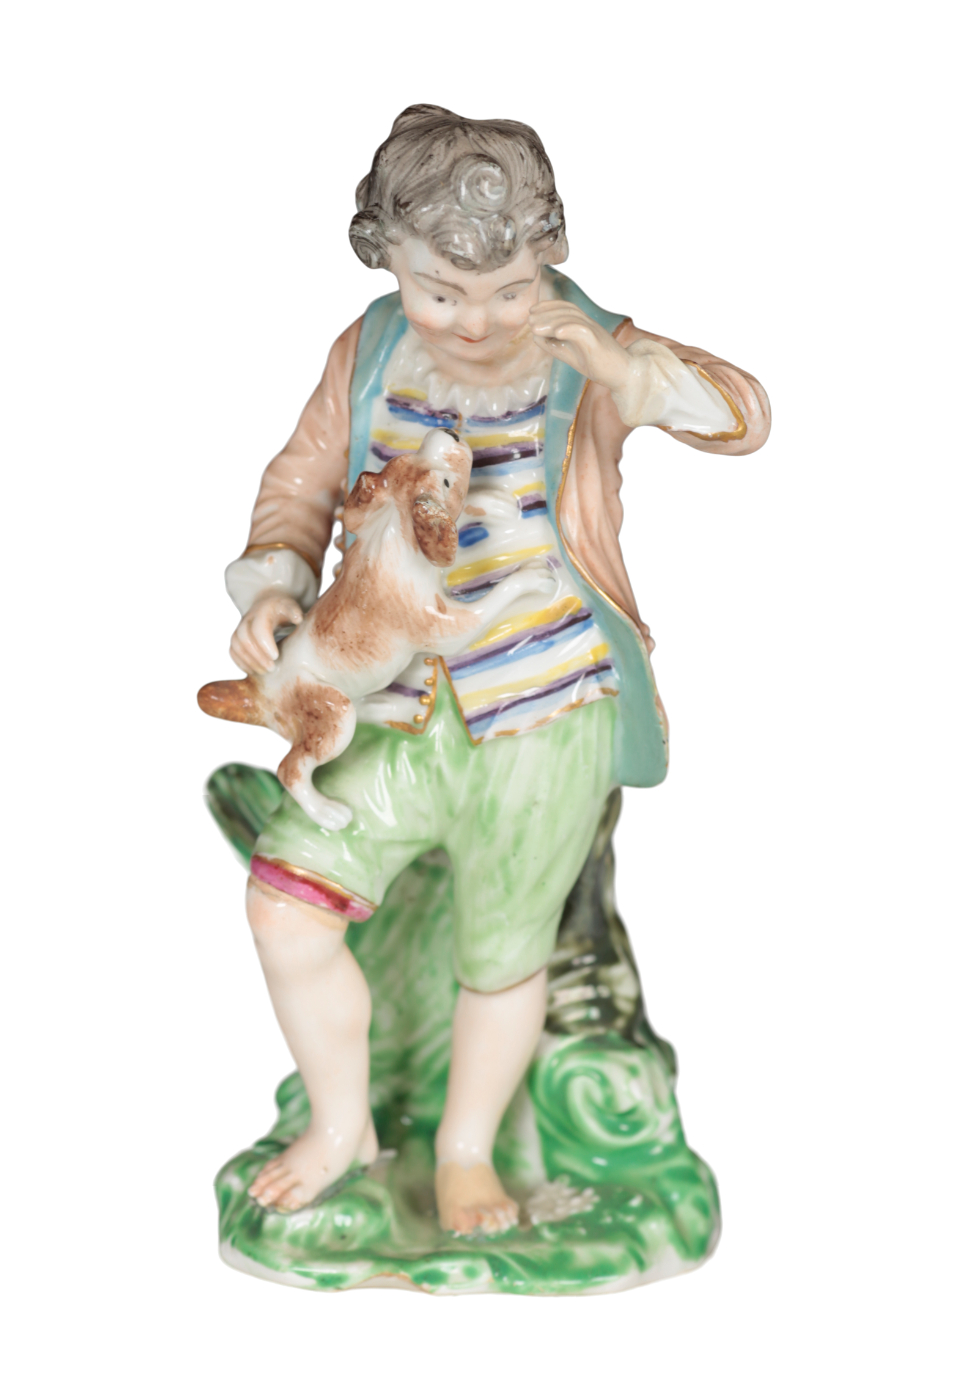 A PAIR OF 18TH CENTURY DUESBURY & CO DERBY PORCELAIN FIGURES - CHILDREN WITH ANIMALS - Image 2 of 4